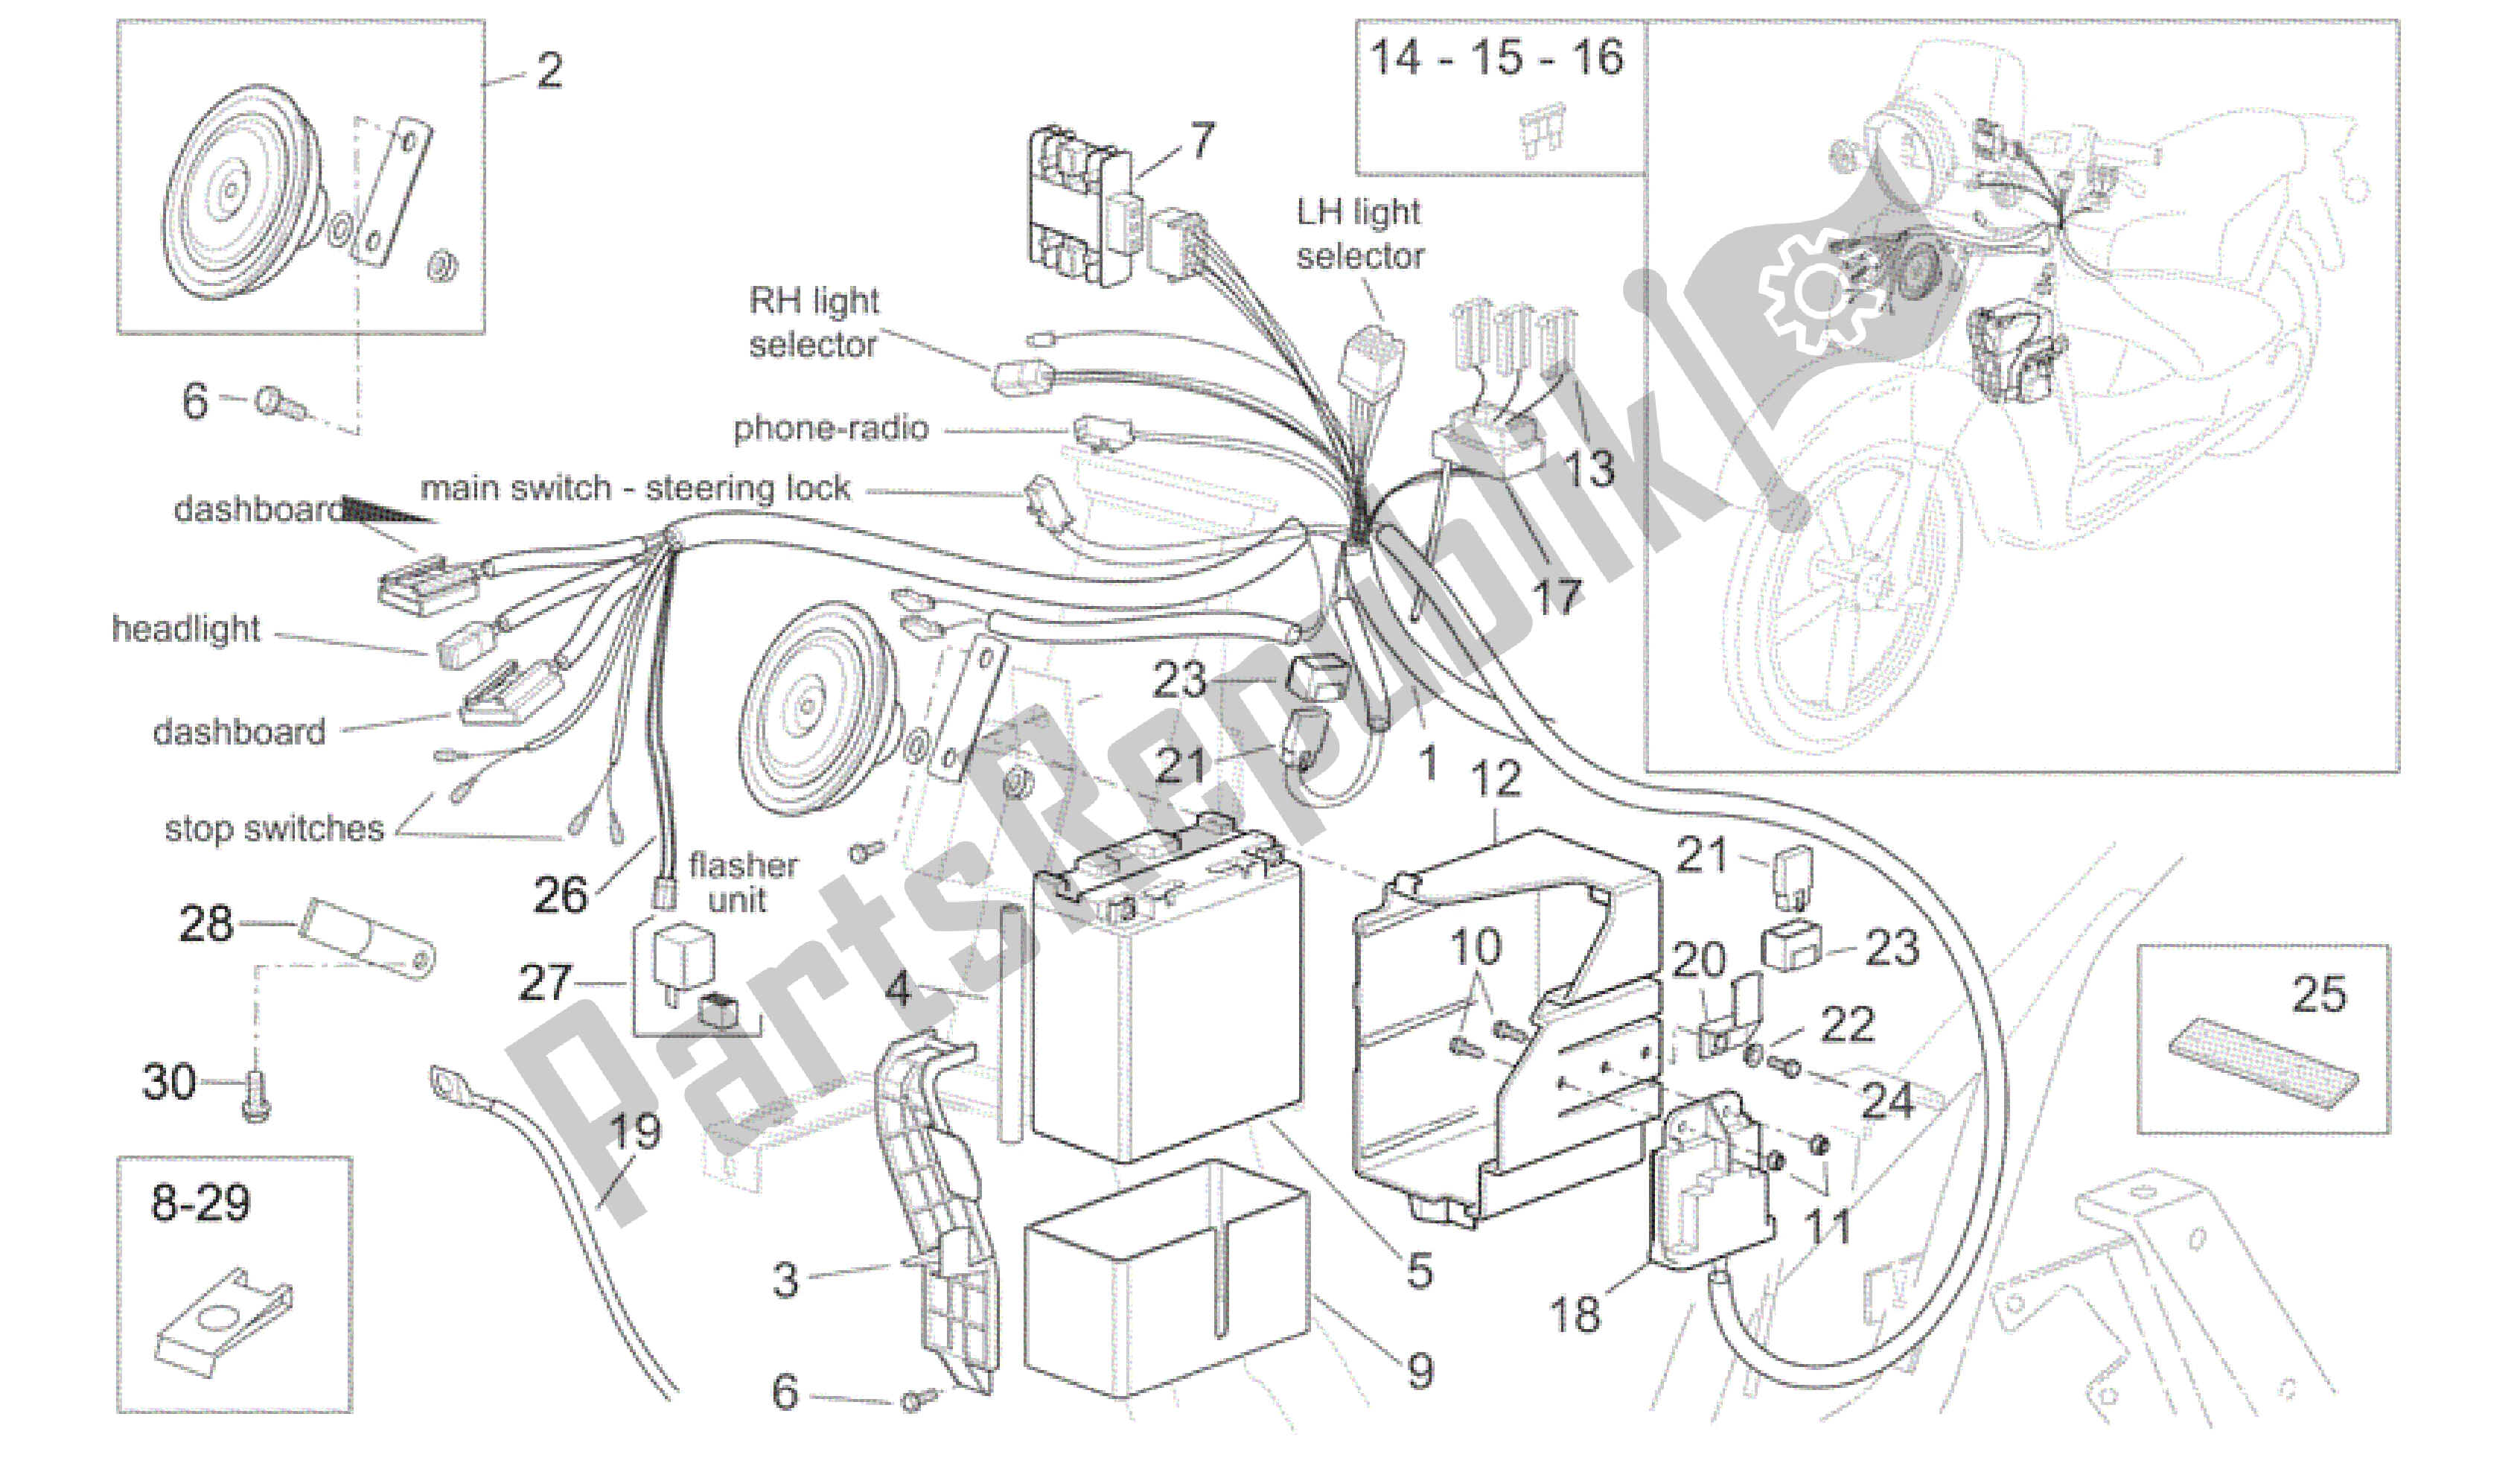 All parts for the Electrical System I of the Aprilia Scarabeo 125 2004 - 2006